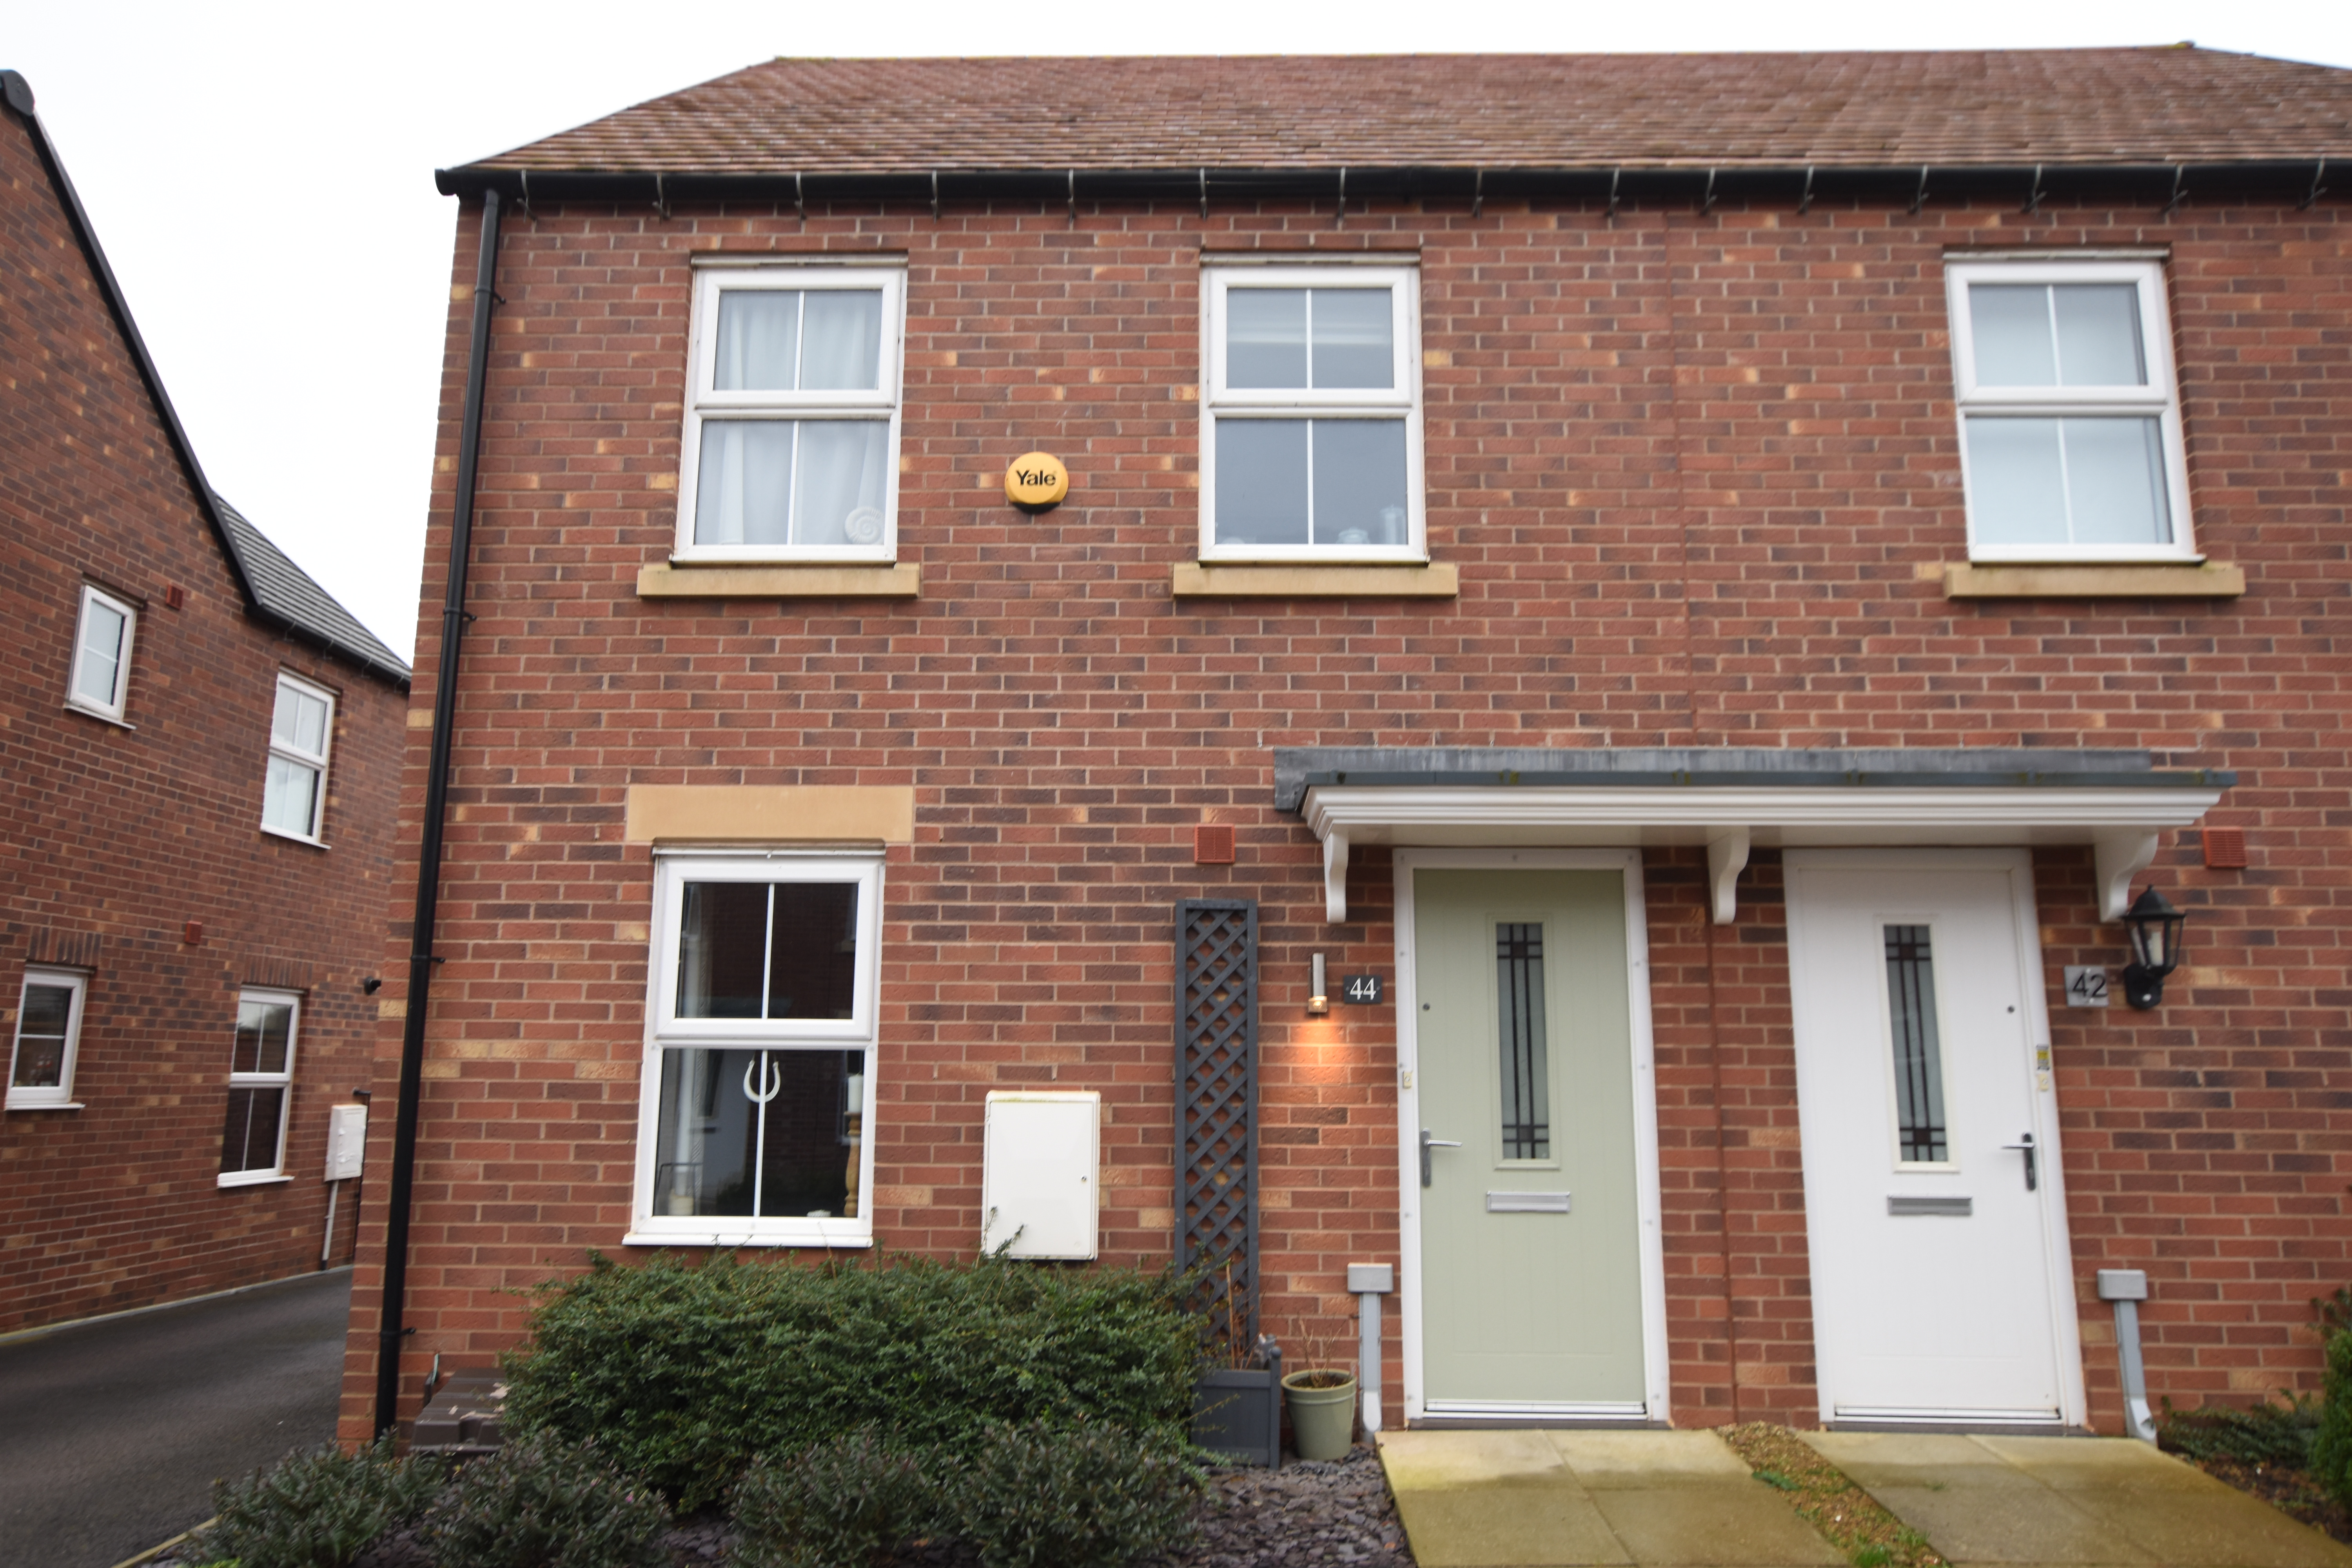 3 bed  for sale in Hobby Road, Banbury  - Property Image 1